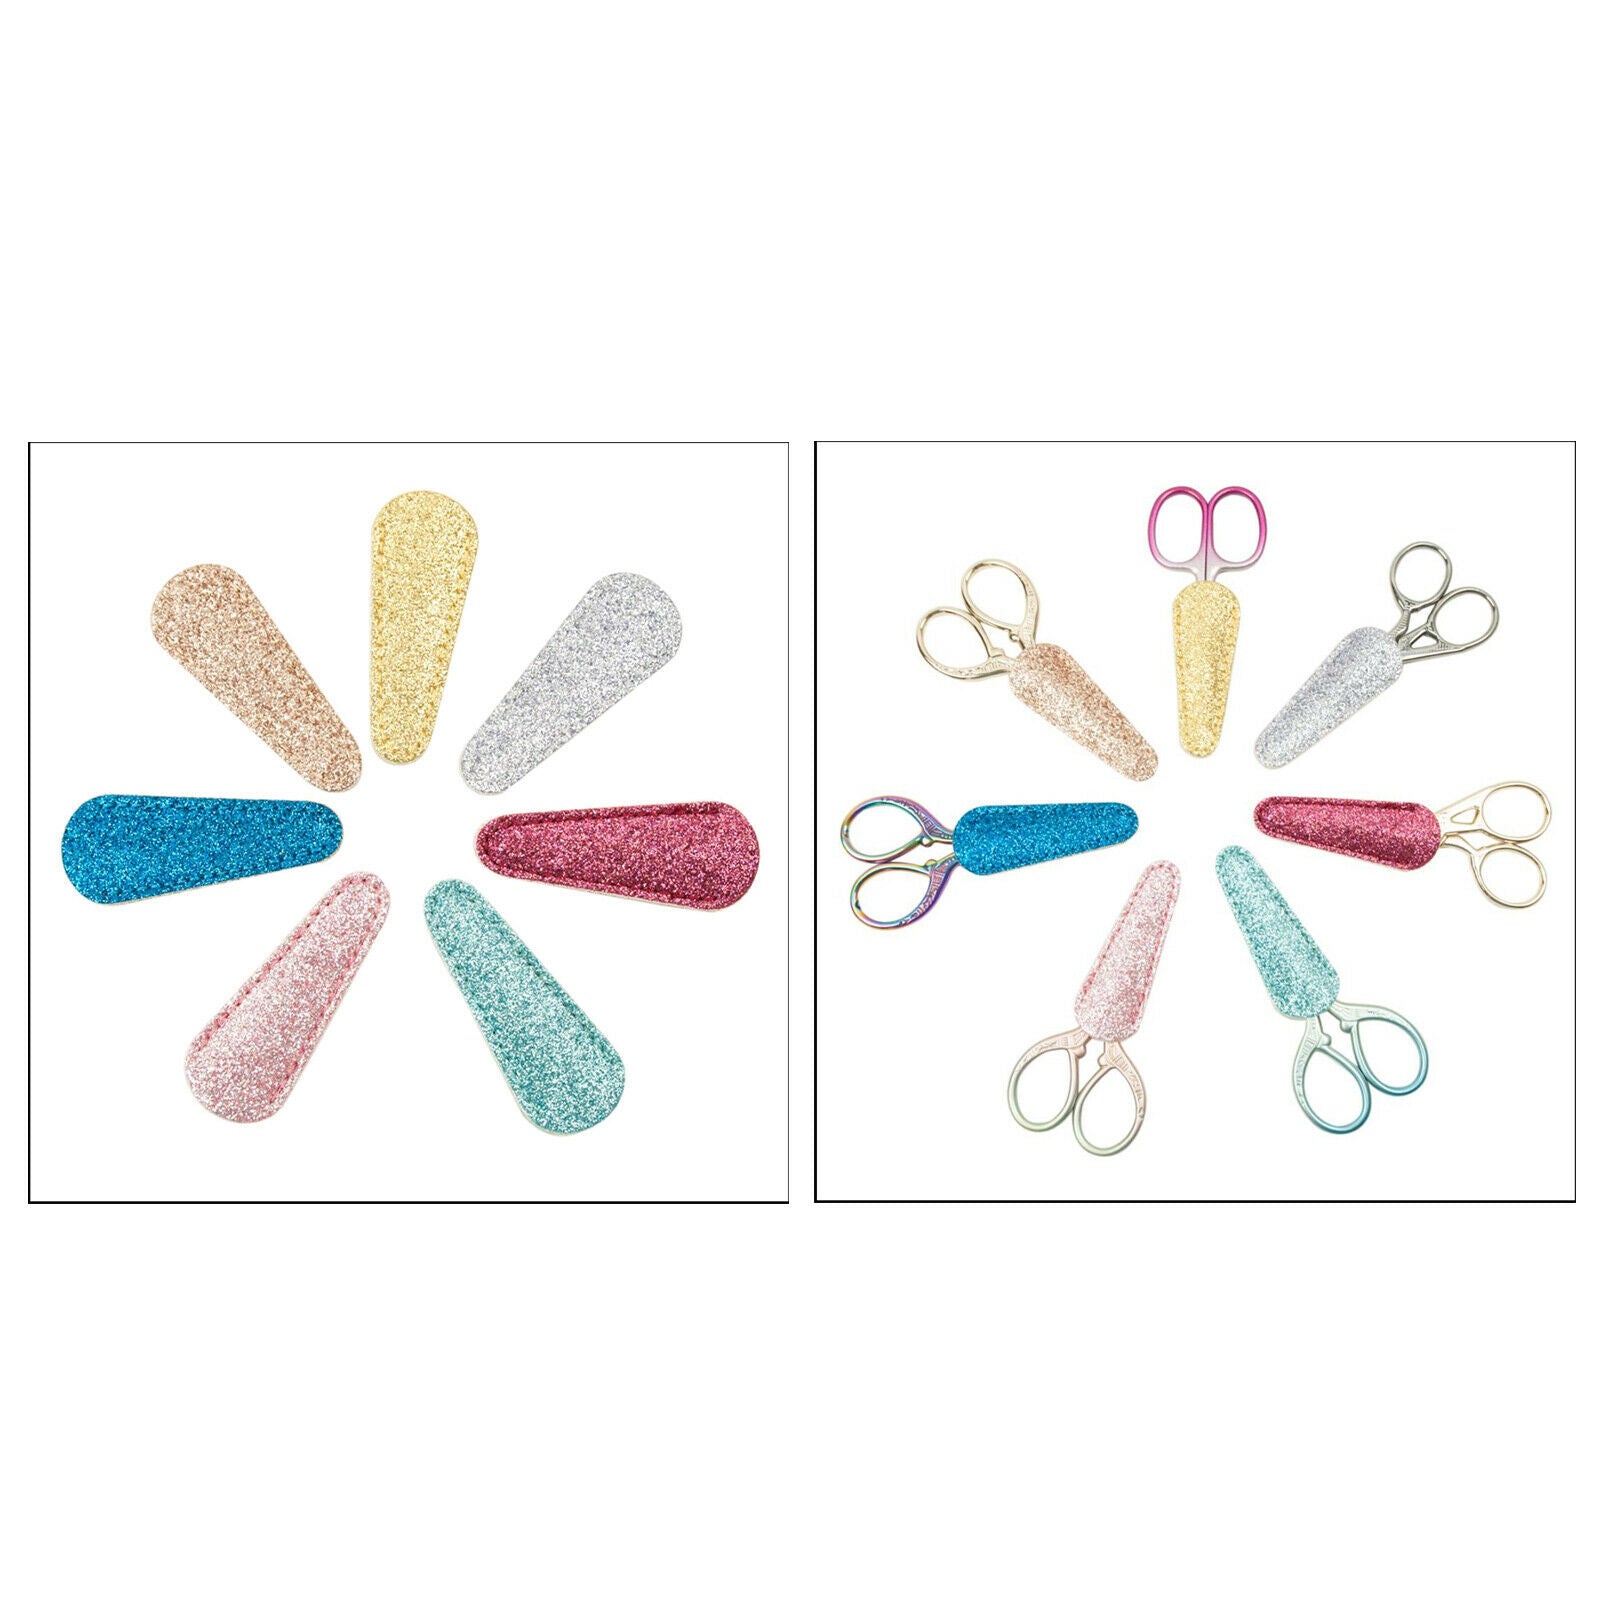 7x Embroidery Scissors Sheath Sewing Protector Cover Collect Bags Trimming